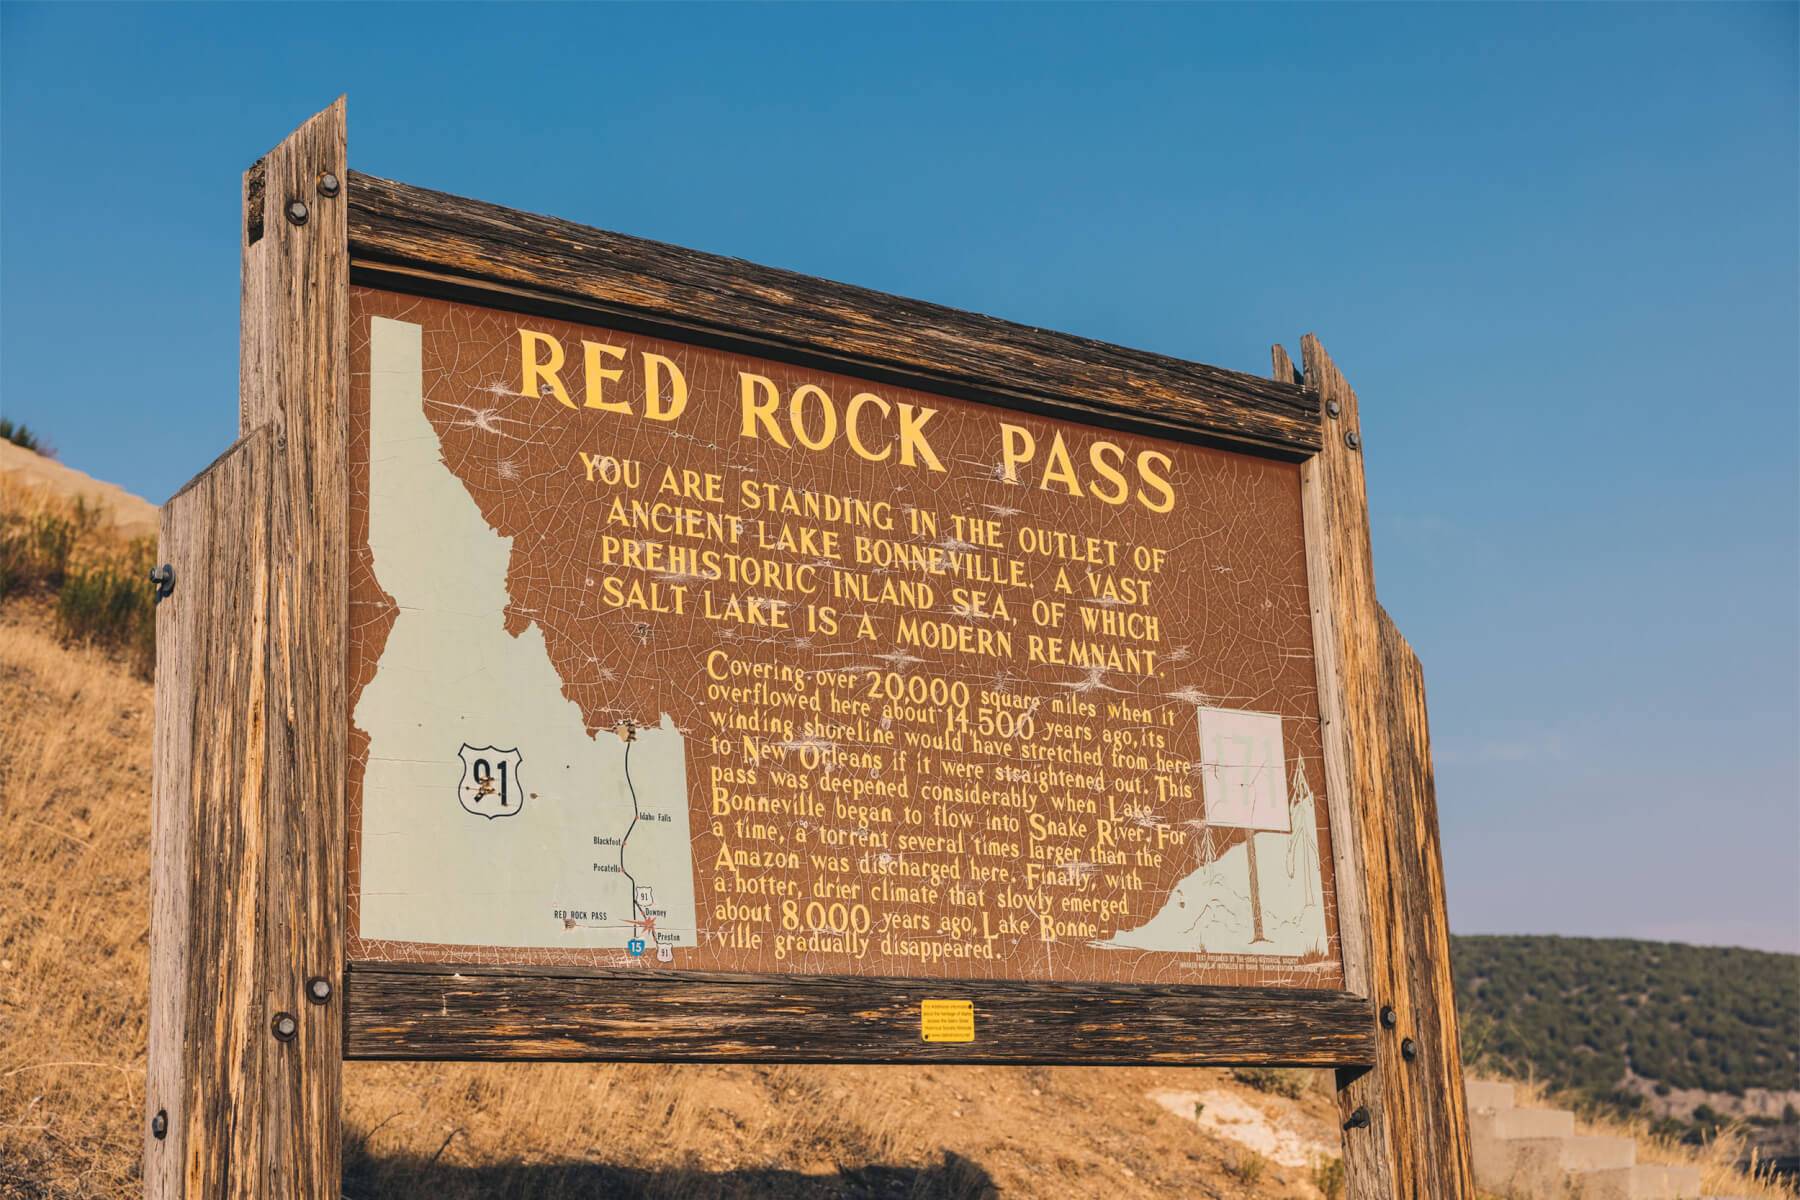 a wooden sign for Red Rock Pass, including a map of Idaho